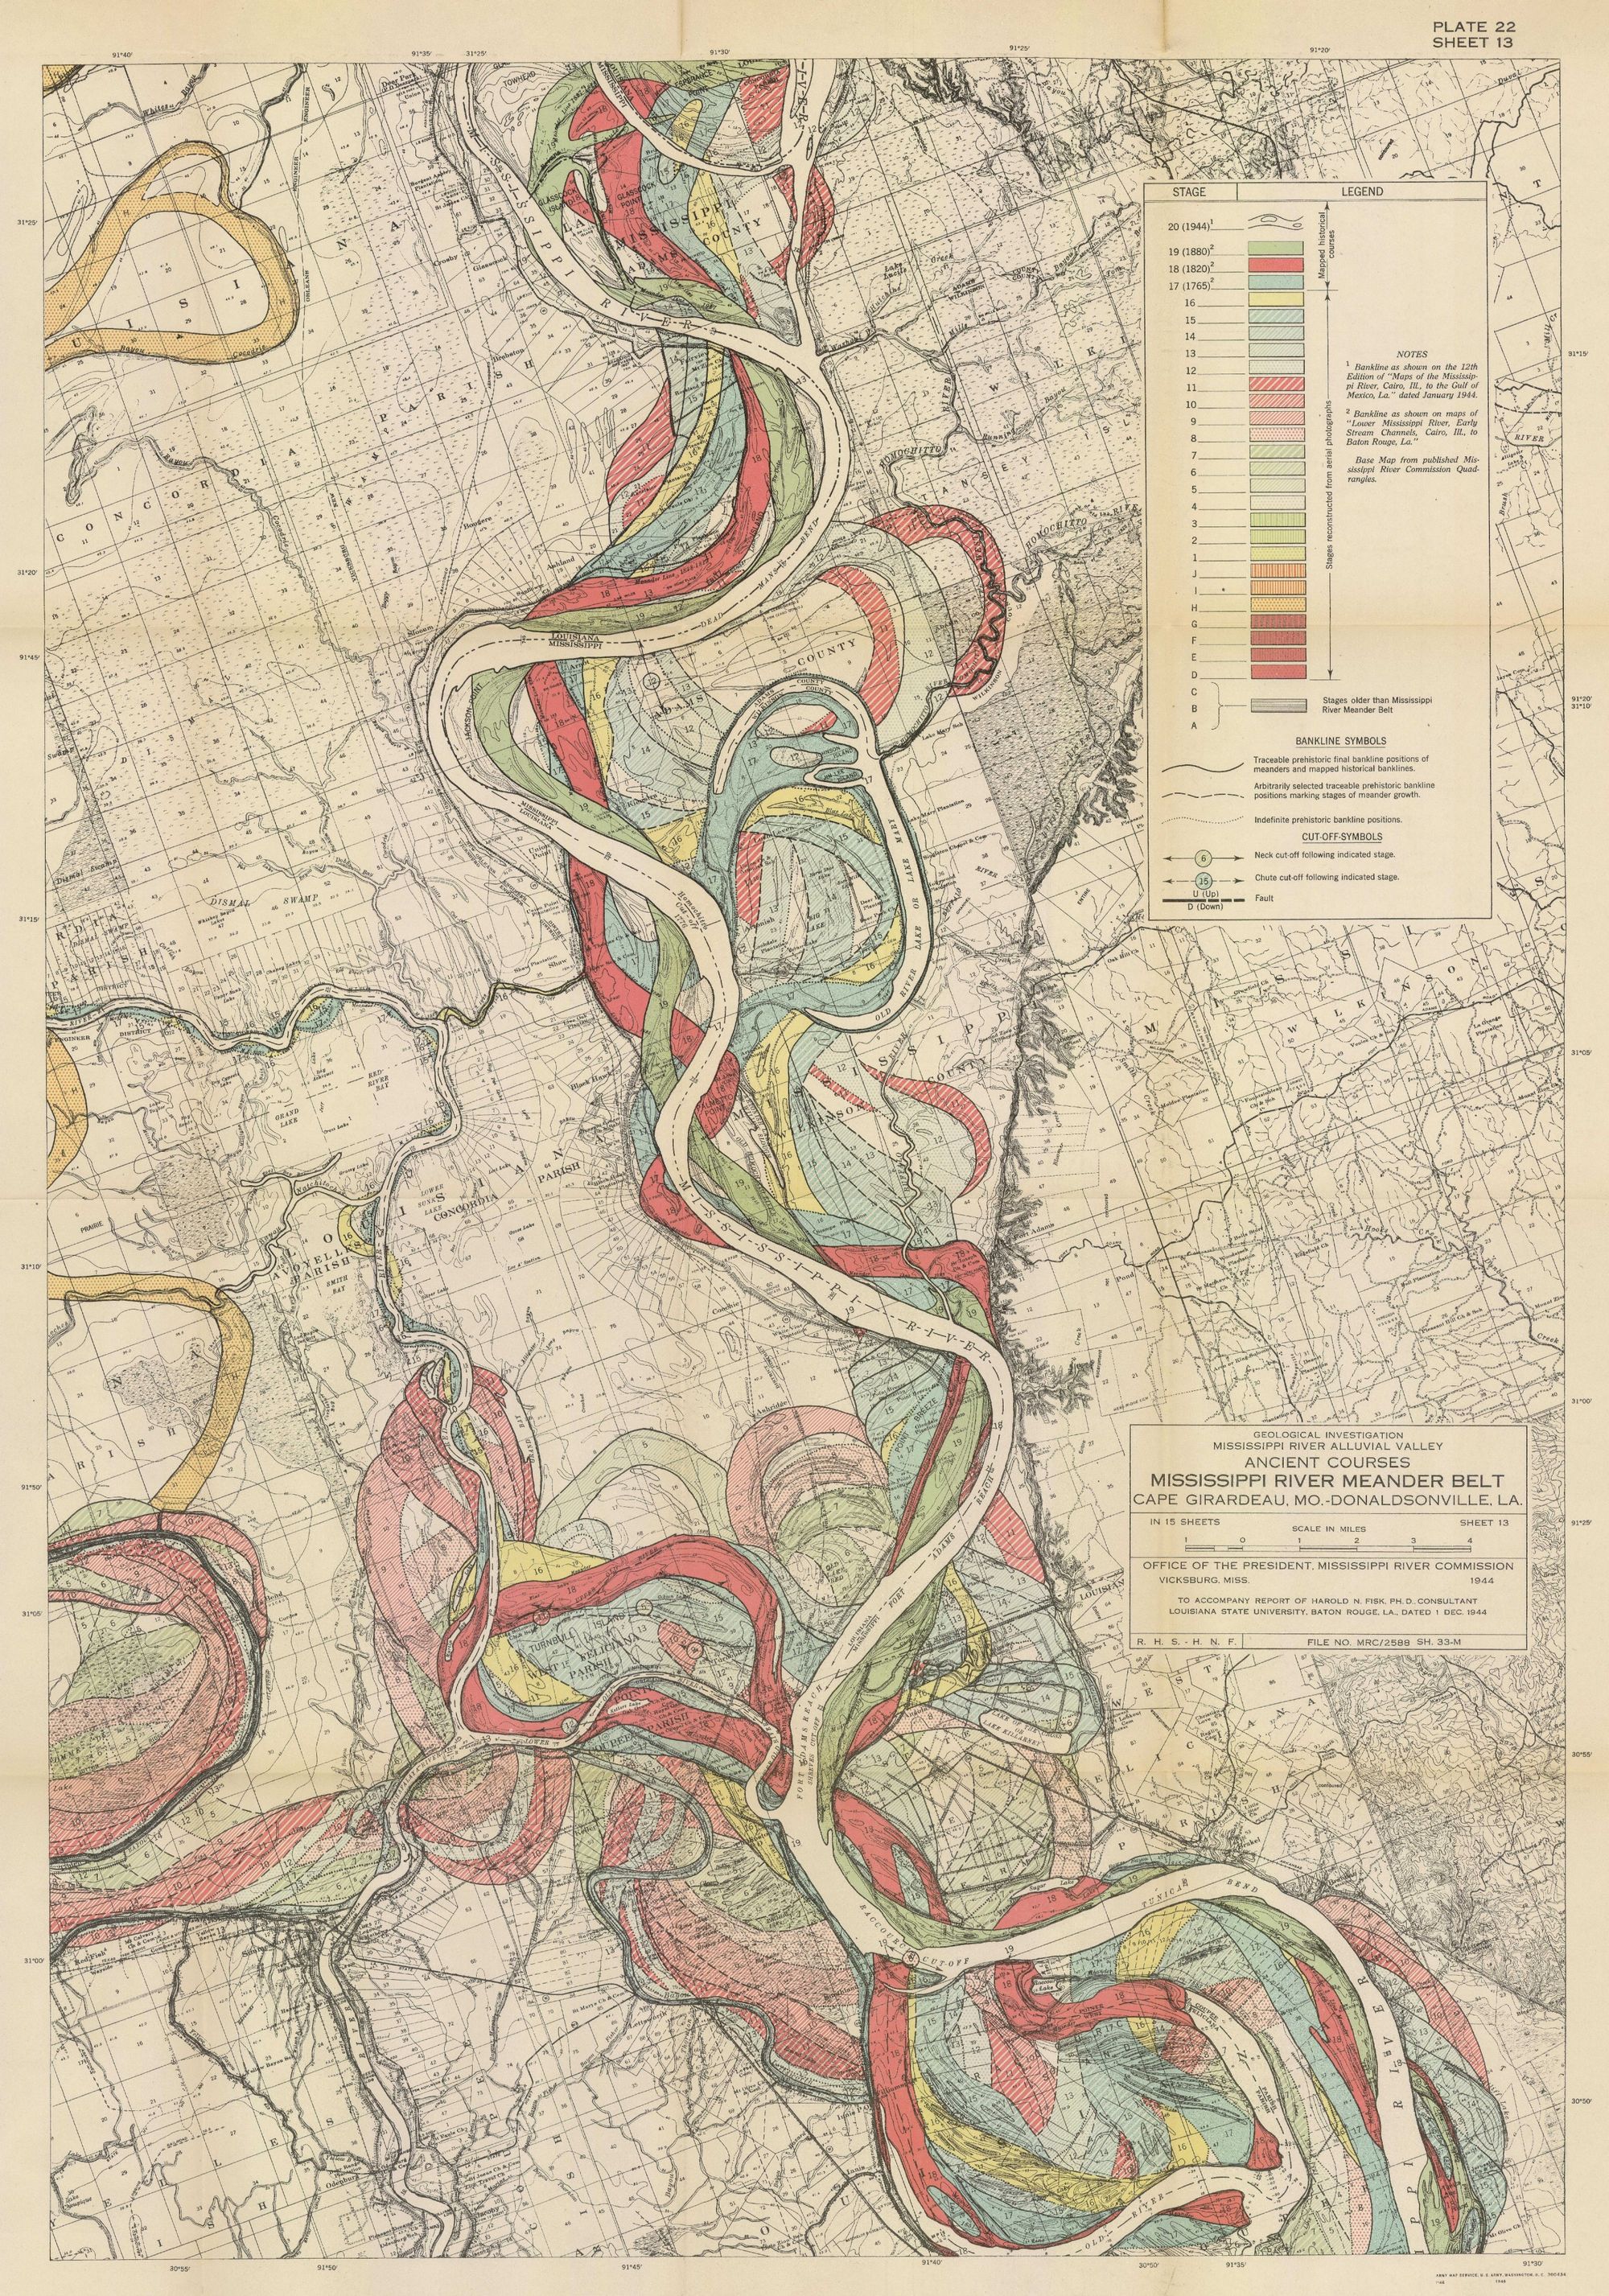 Colorful map of the Mississippi's meander over decades